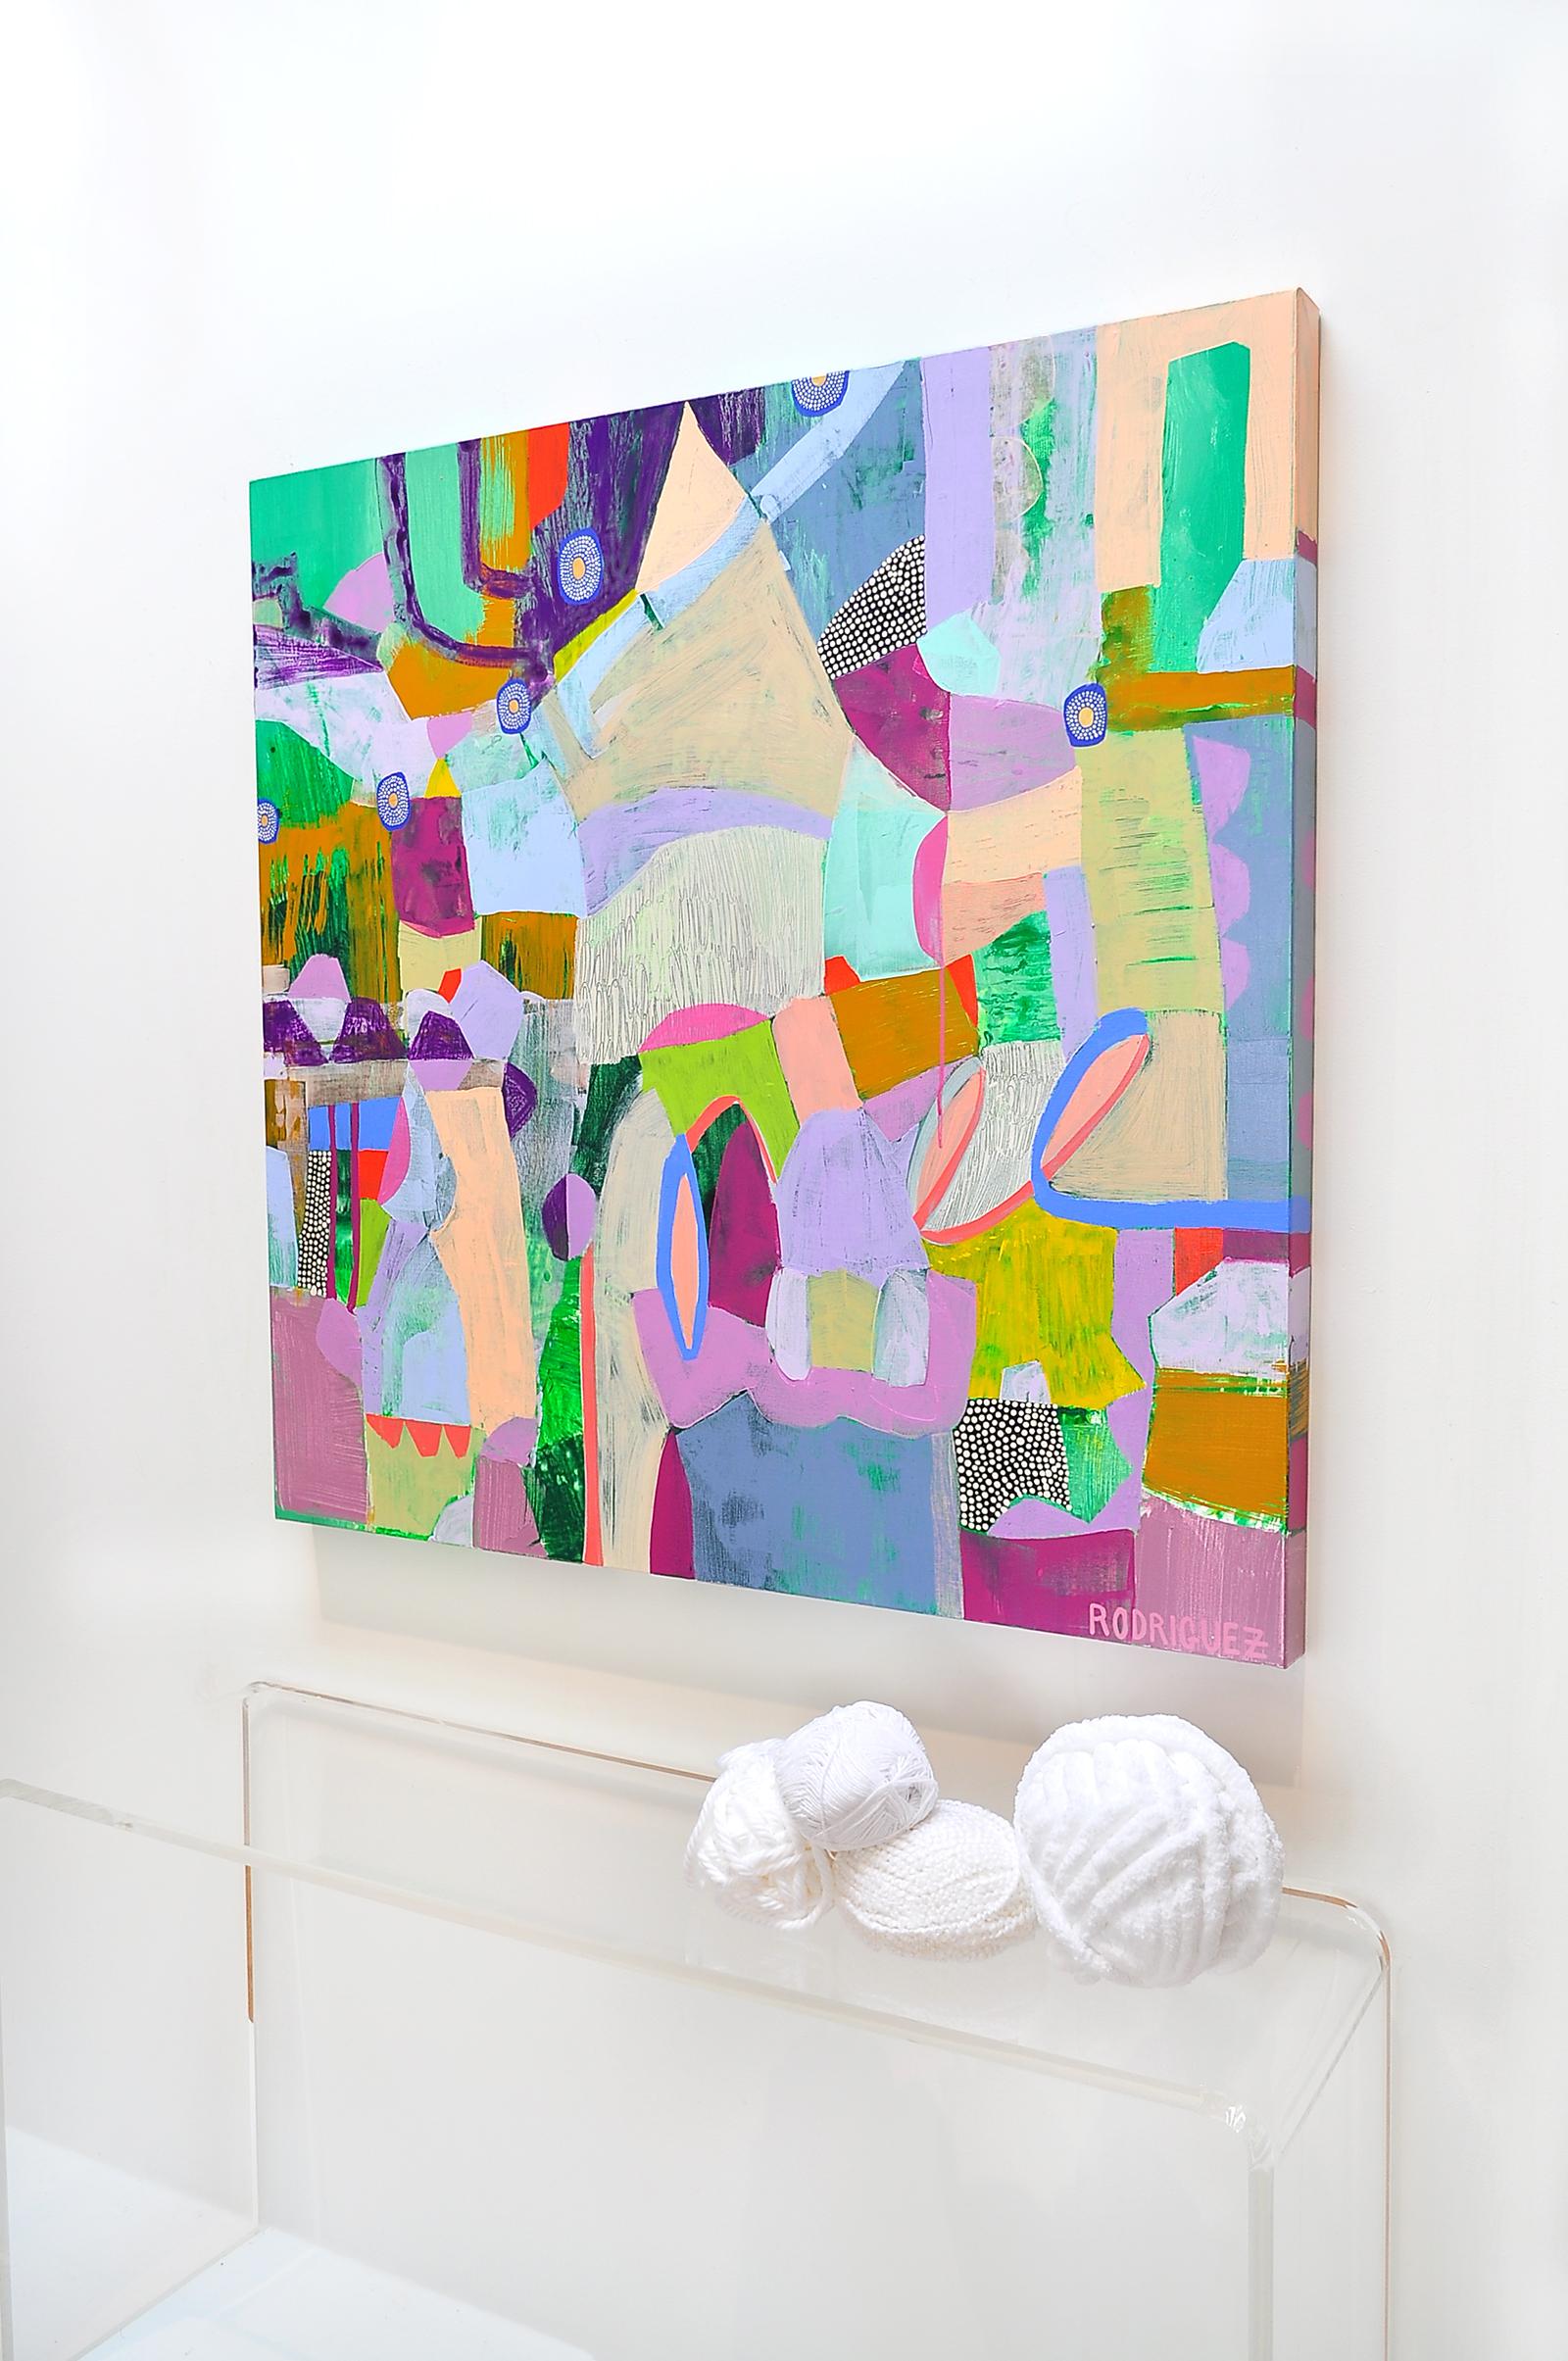 Singing Along to Our Favorite Song - Abstract Painting by Marianne Angeli Rodriguez